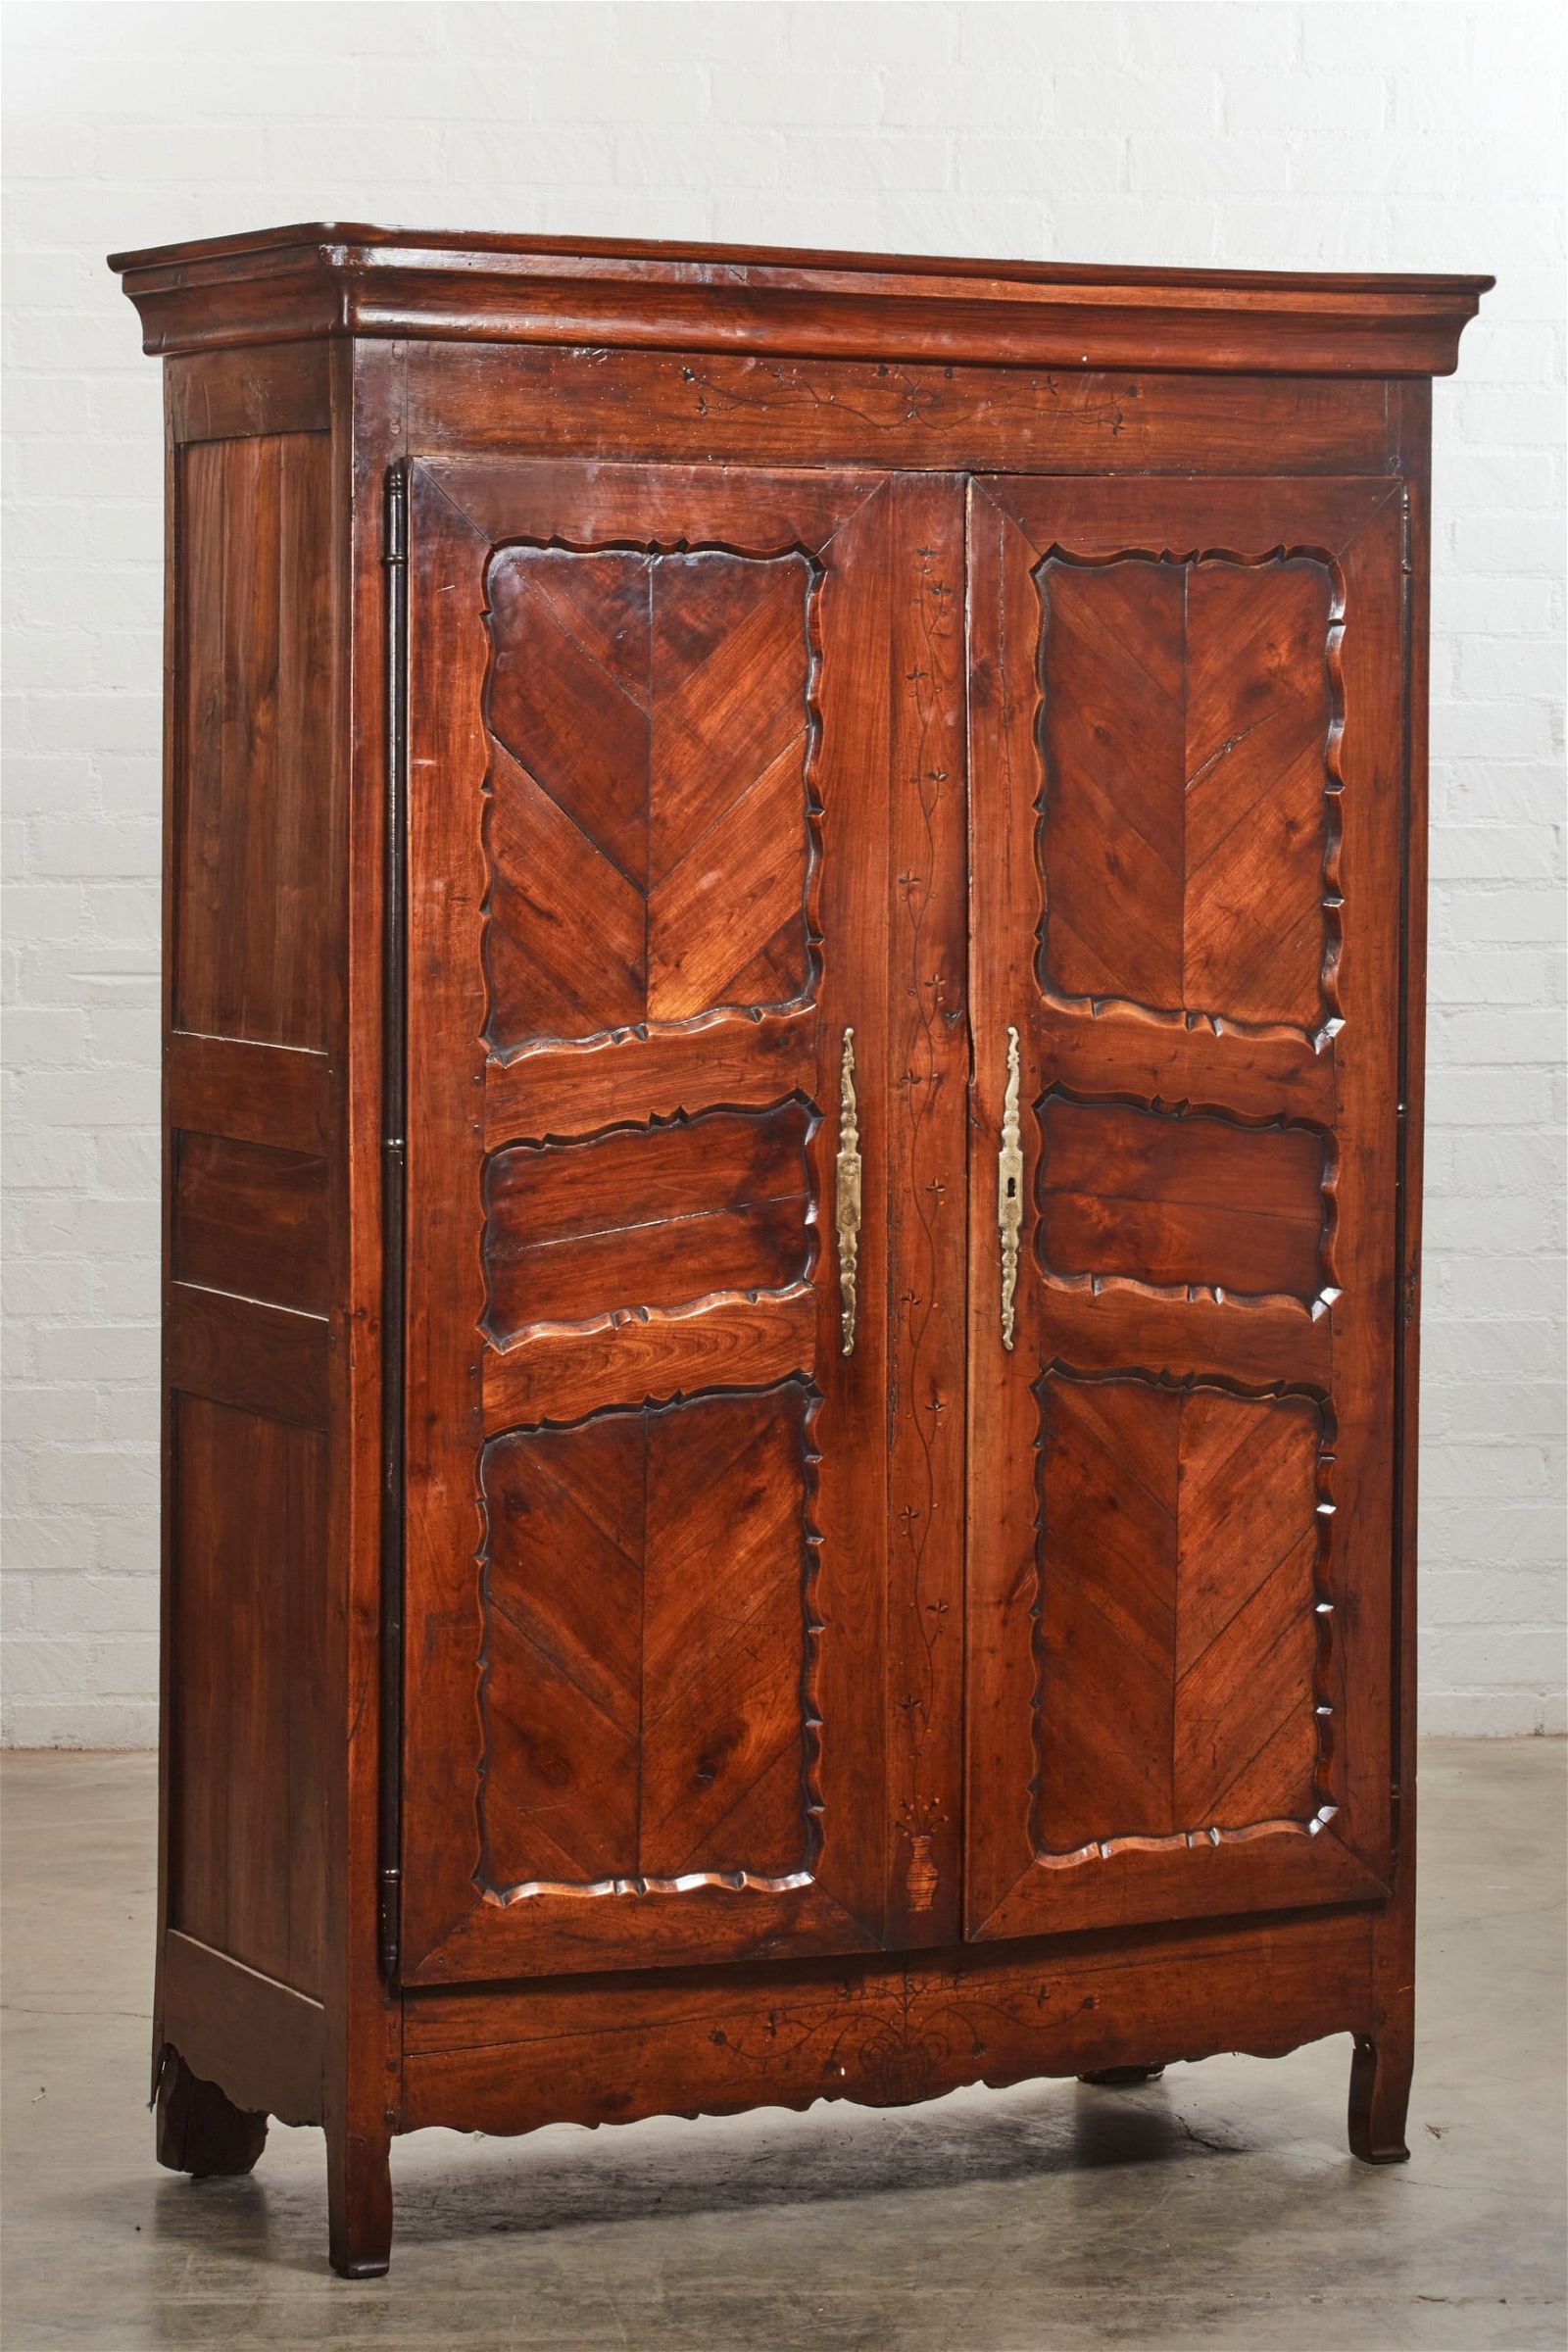 A FRENCH PROVINCIAL INLAID FRUITWOOD